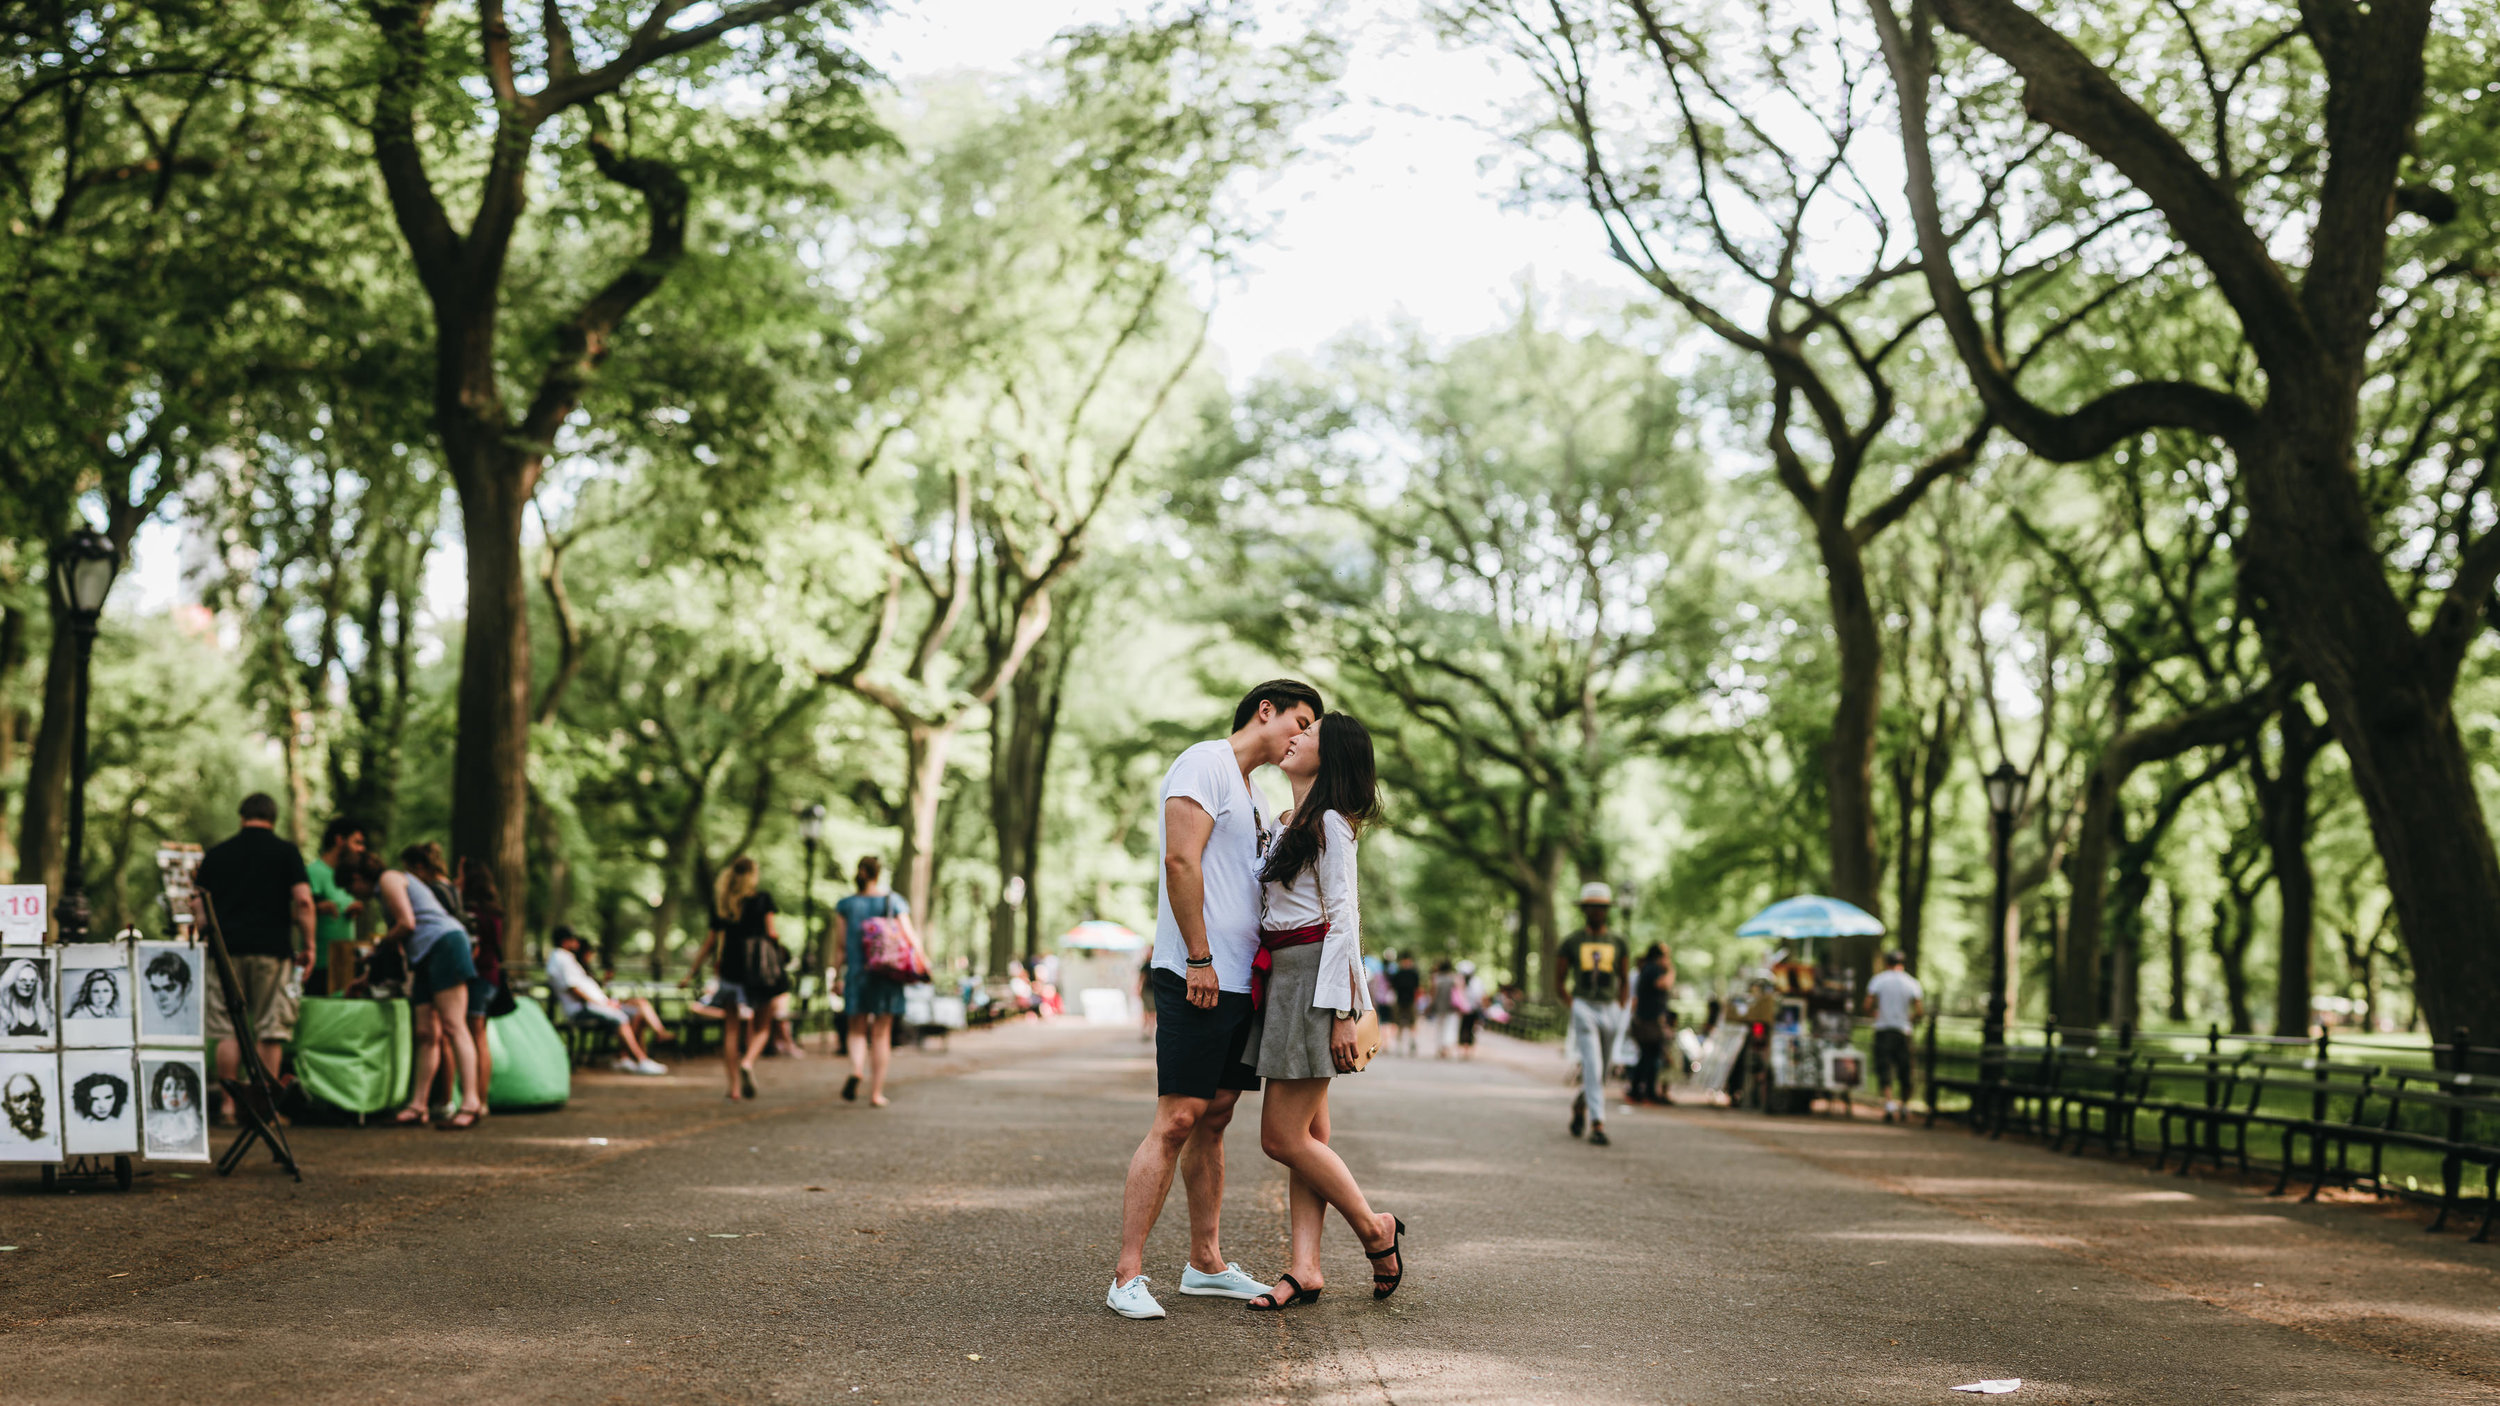 Sabrina and Sean kissing during their engagement photoshoot in Central Park, New York